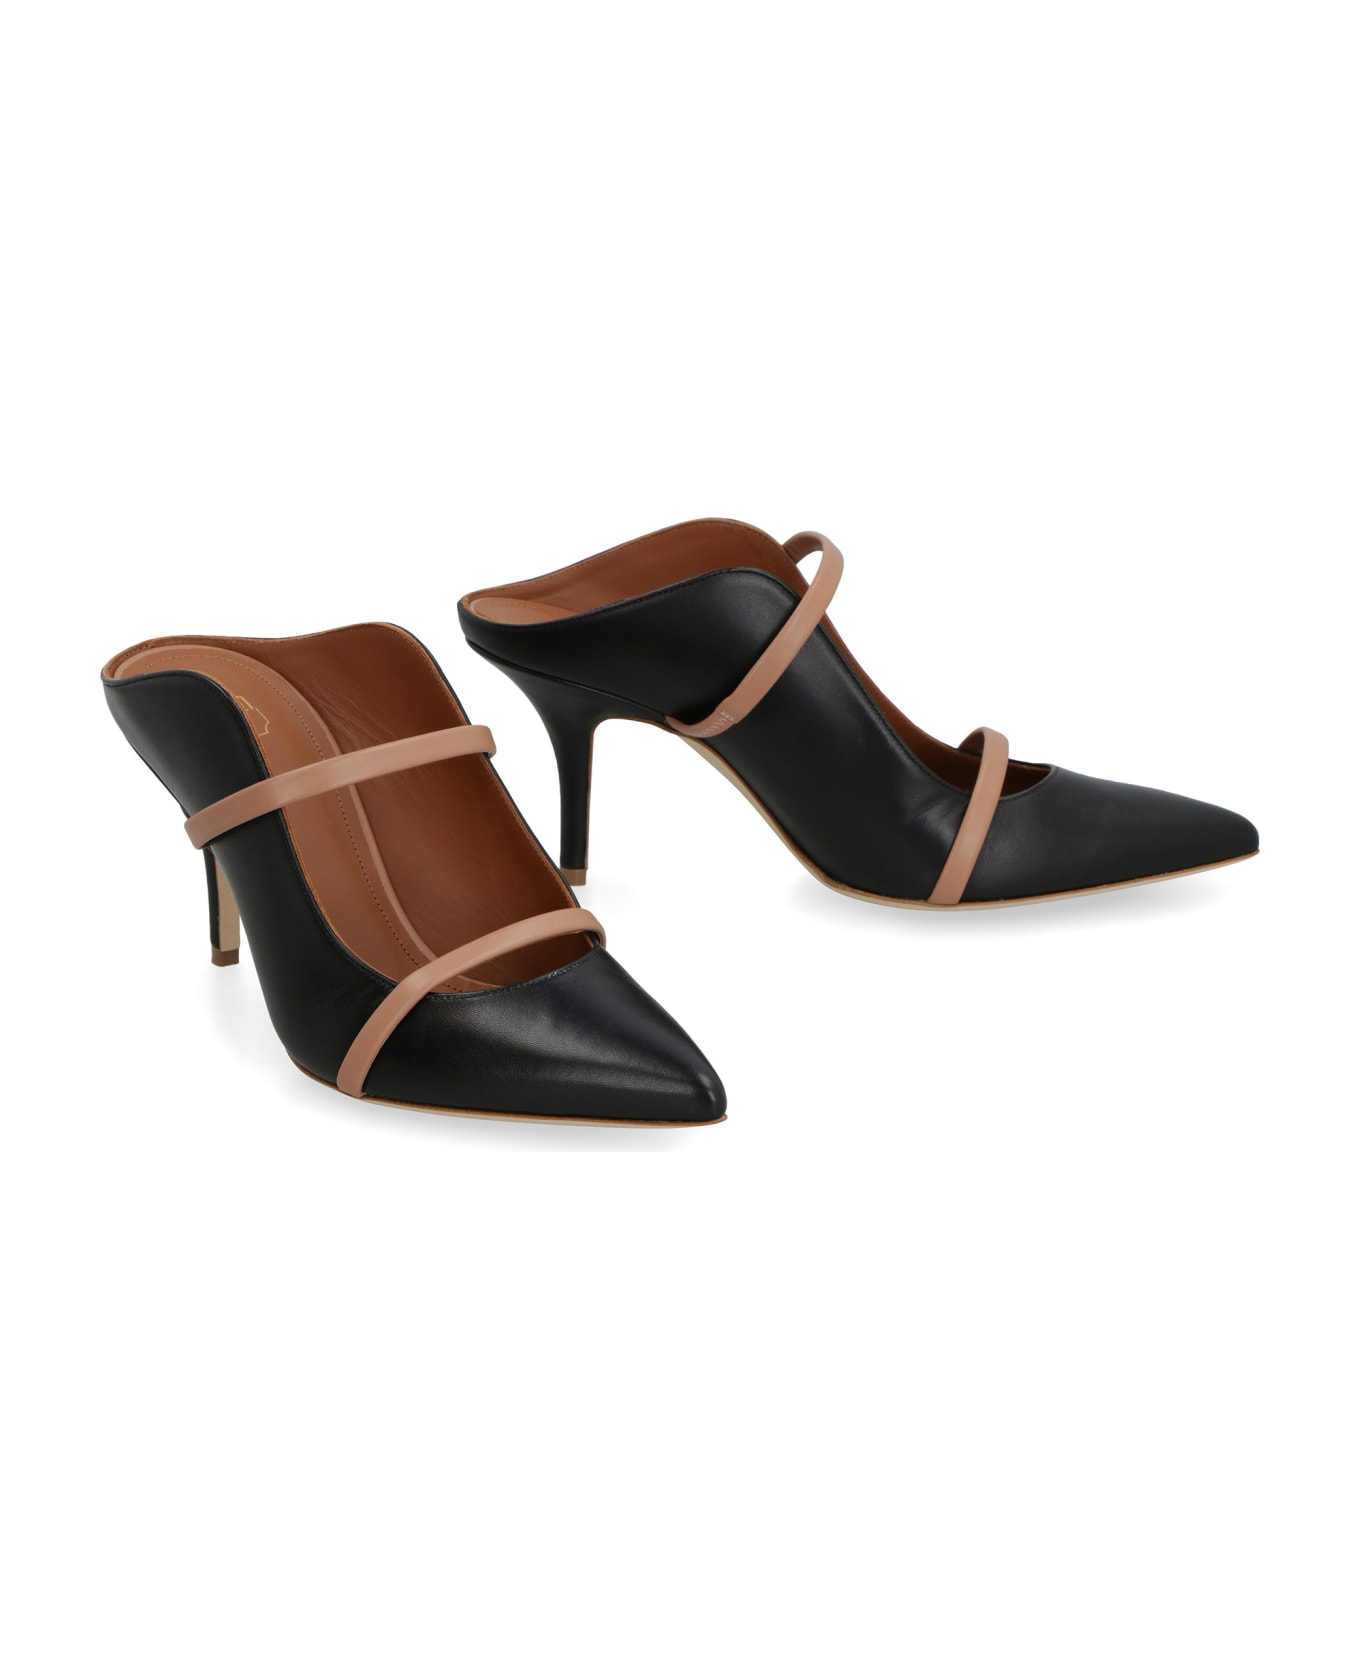 Malone Souliers Maureen Leather Mules - Black